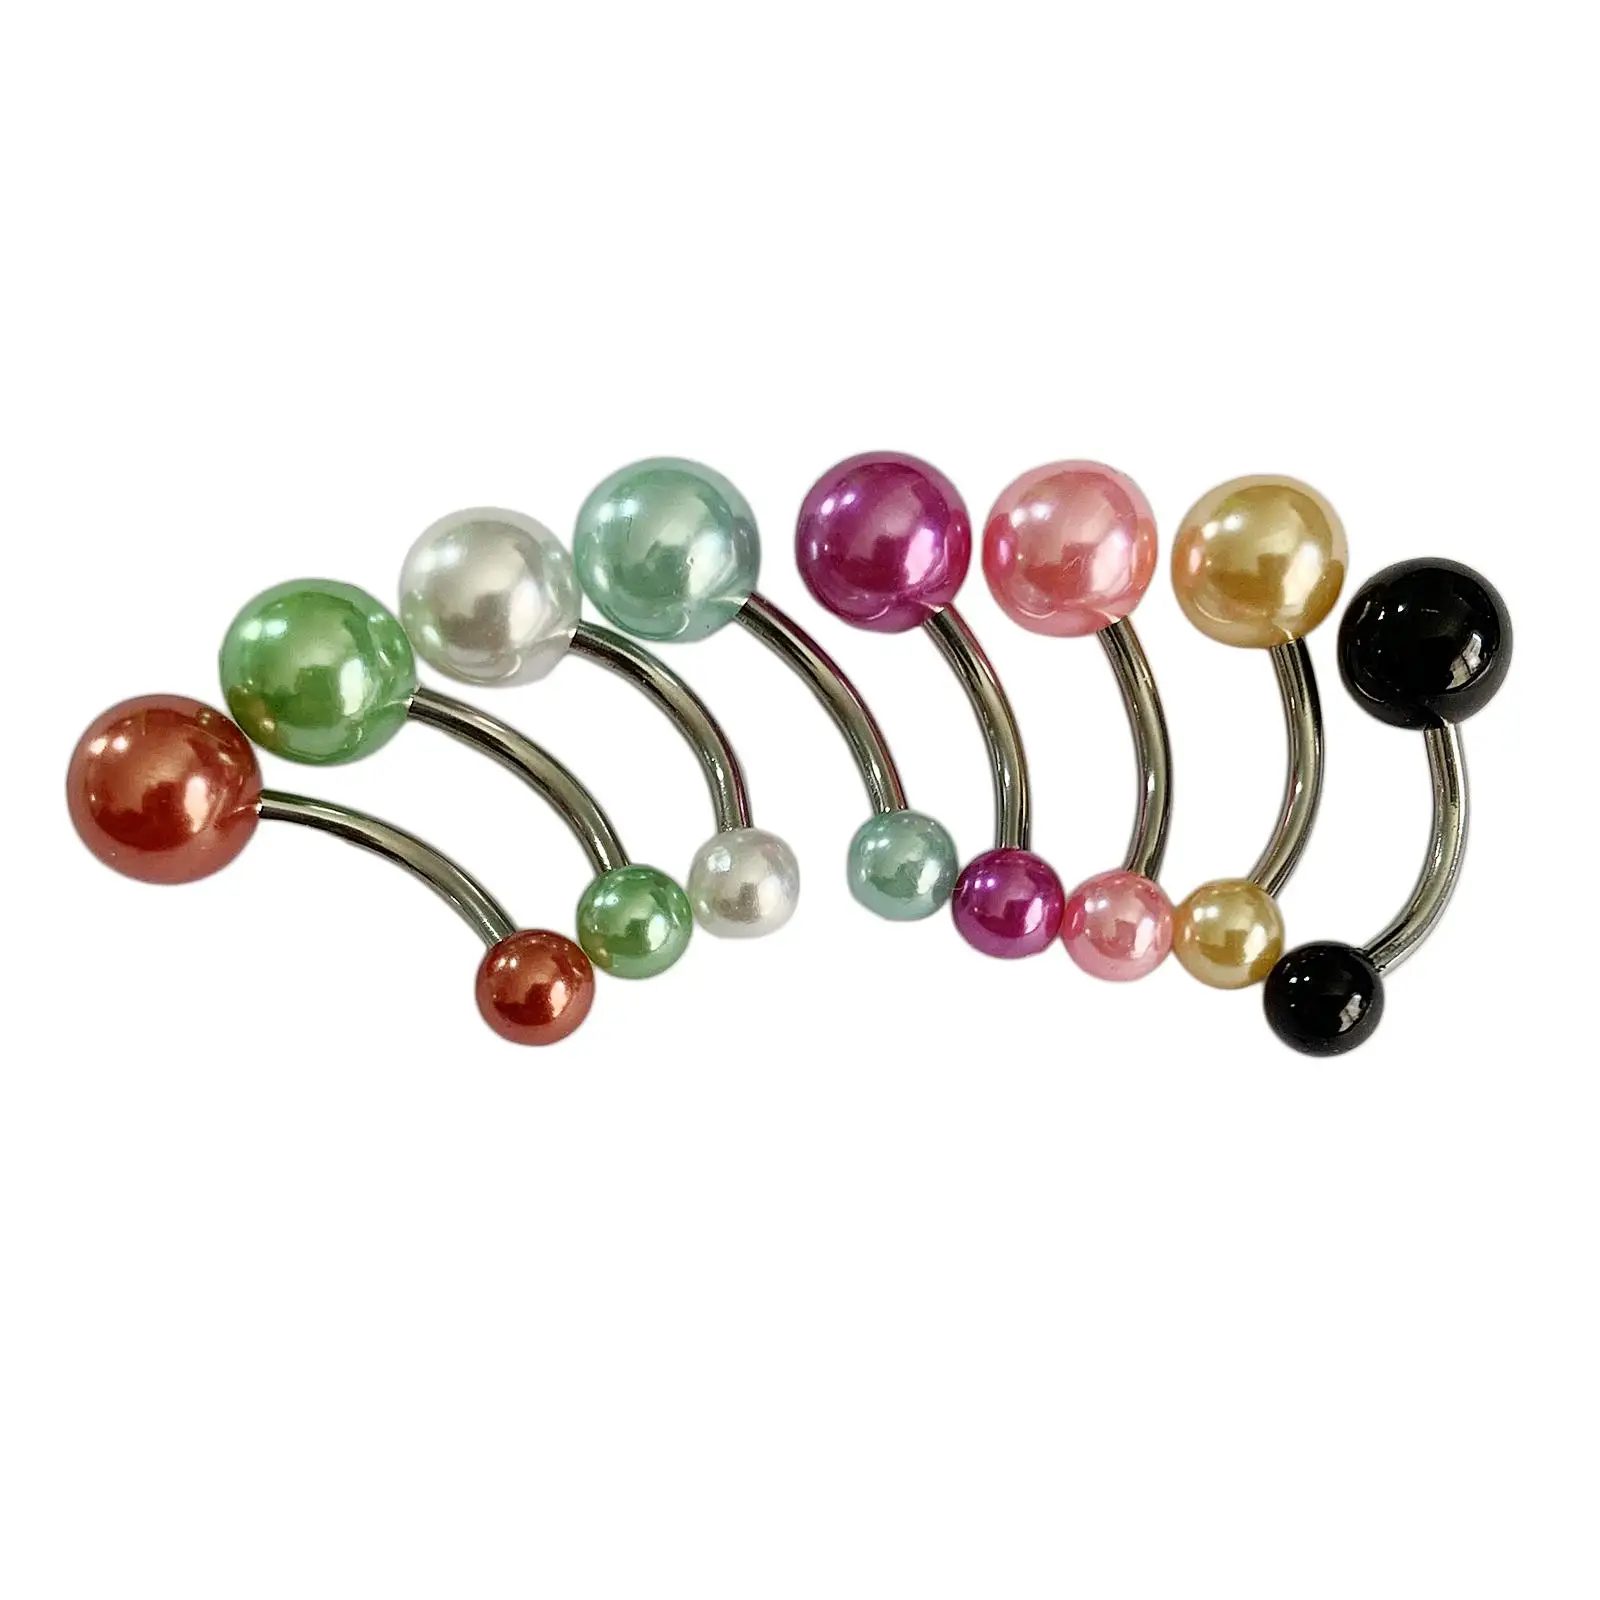 8x Belly Button Rings Easy to Wear Comfortable Hip Rock 10mm 1.6mm Fashion Acrylic Body Piercing Jewelry for Women Men